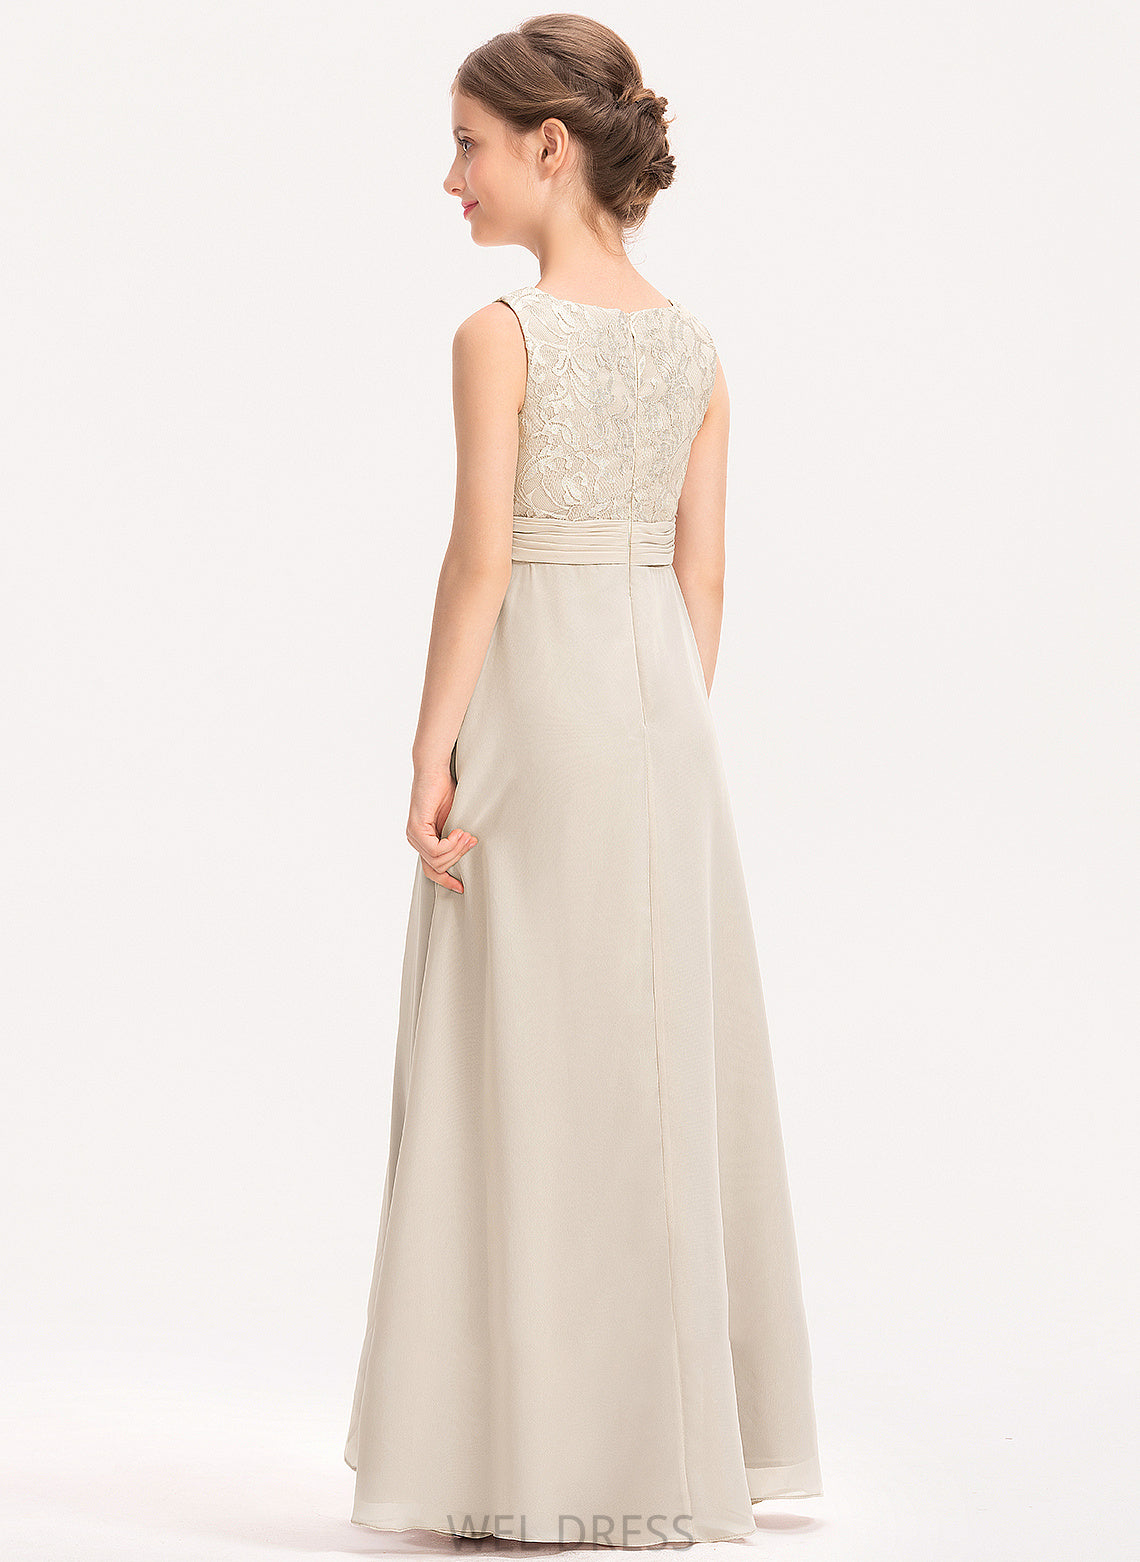 Scoop Chiffon Neck With Heidy A-Line Junior Bridesmaid Dresses Ruffle Lace Floor-Length